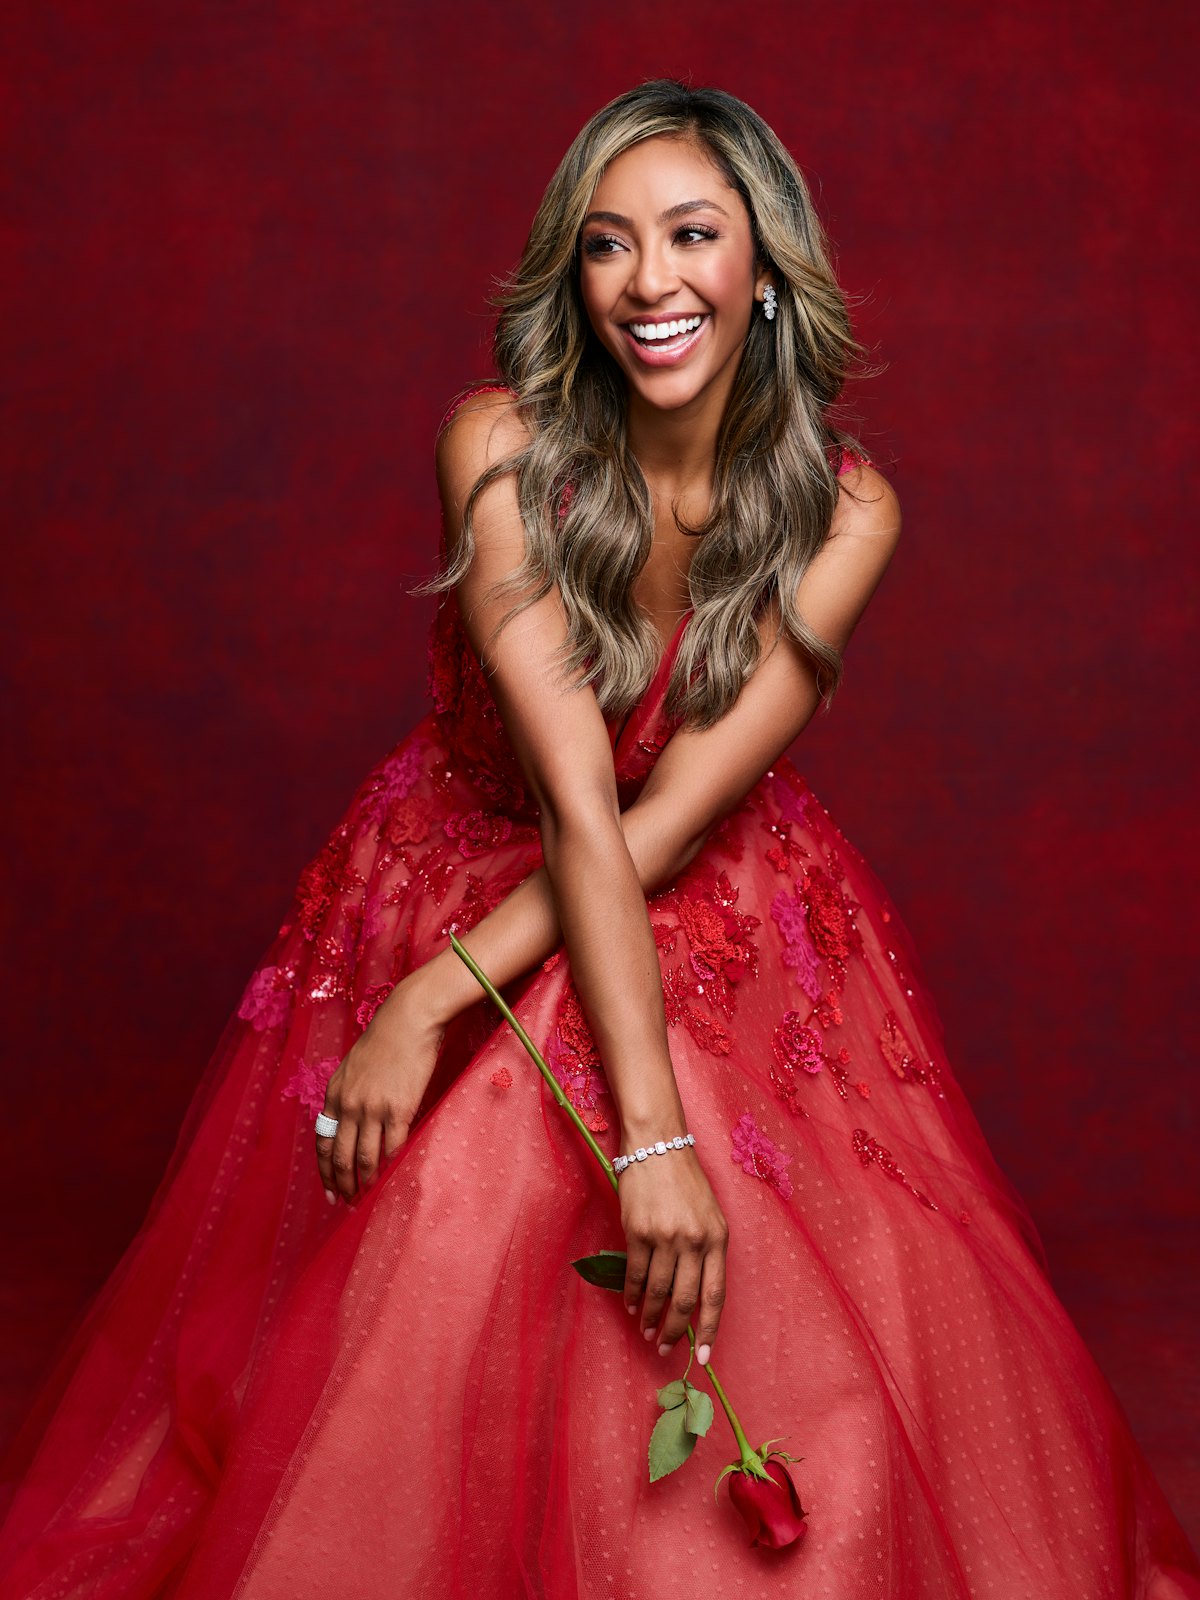 Tayshia may have just revealed which contestant is the frontrunner to get her final rose.